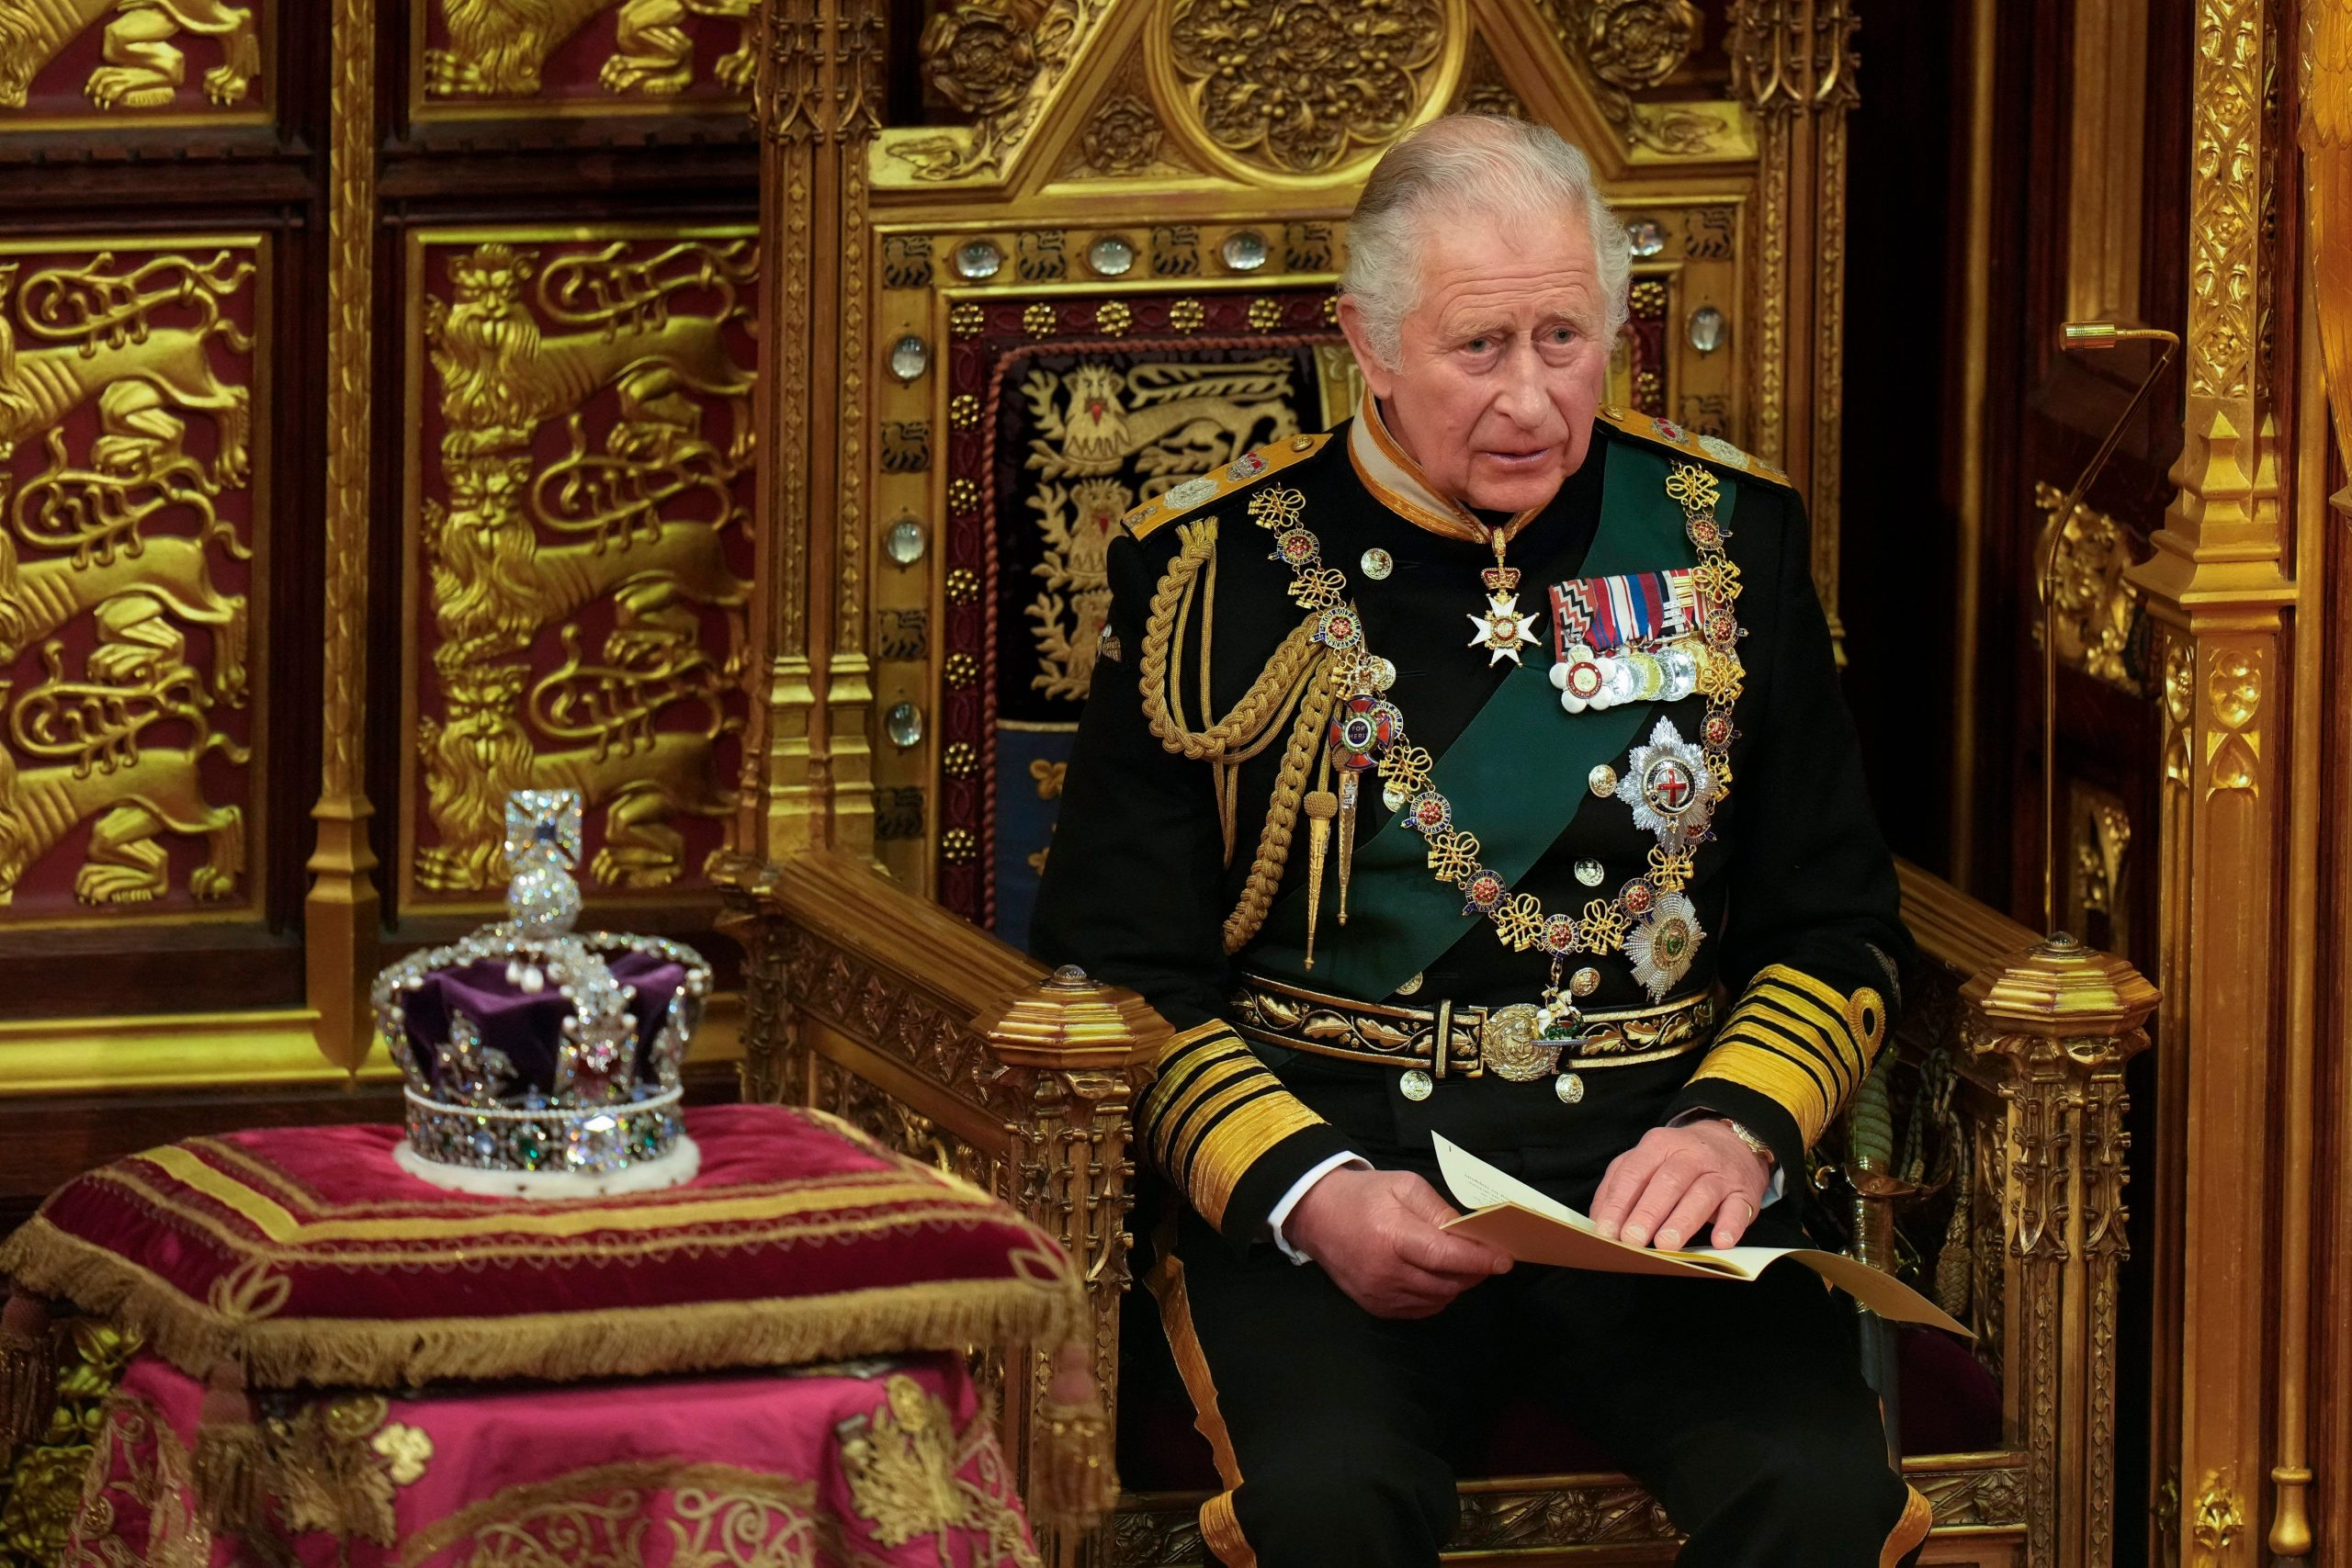 Prince Charles is king of England: List of scandals